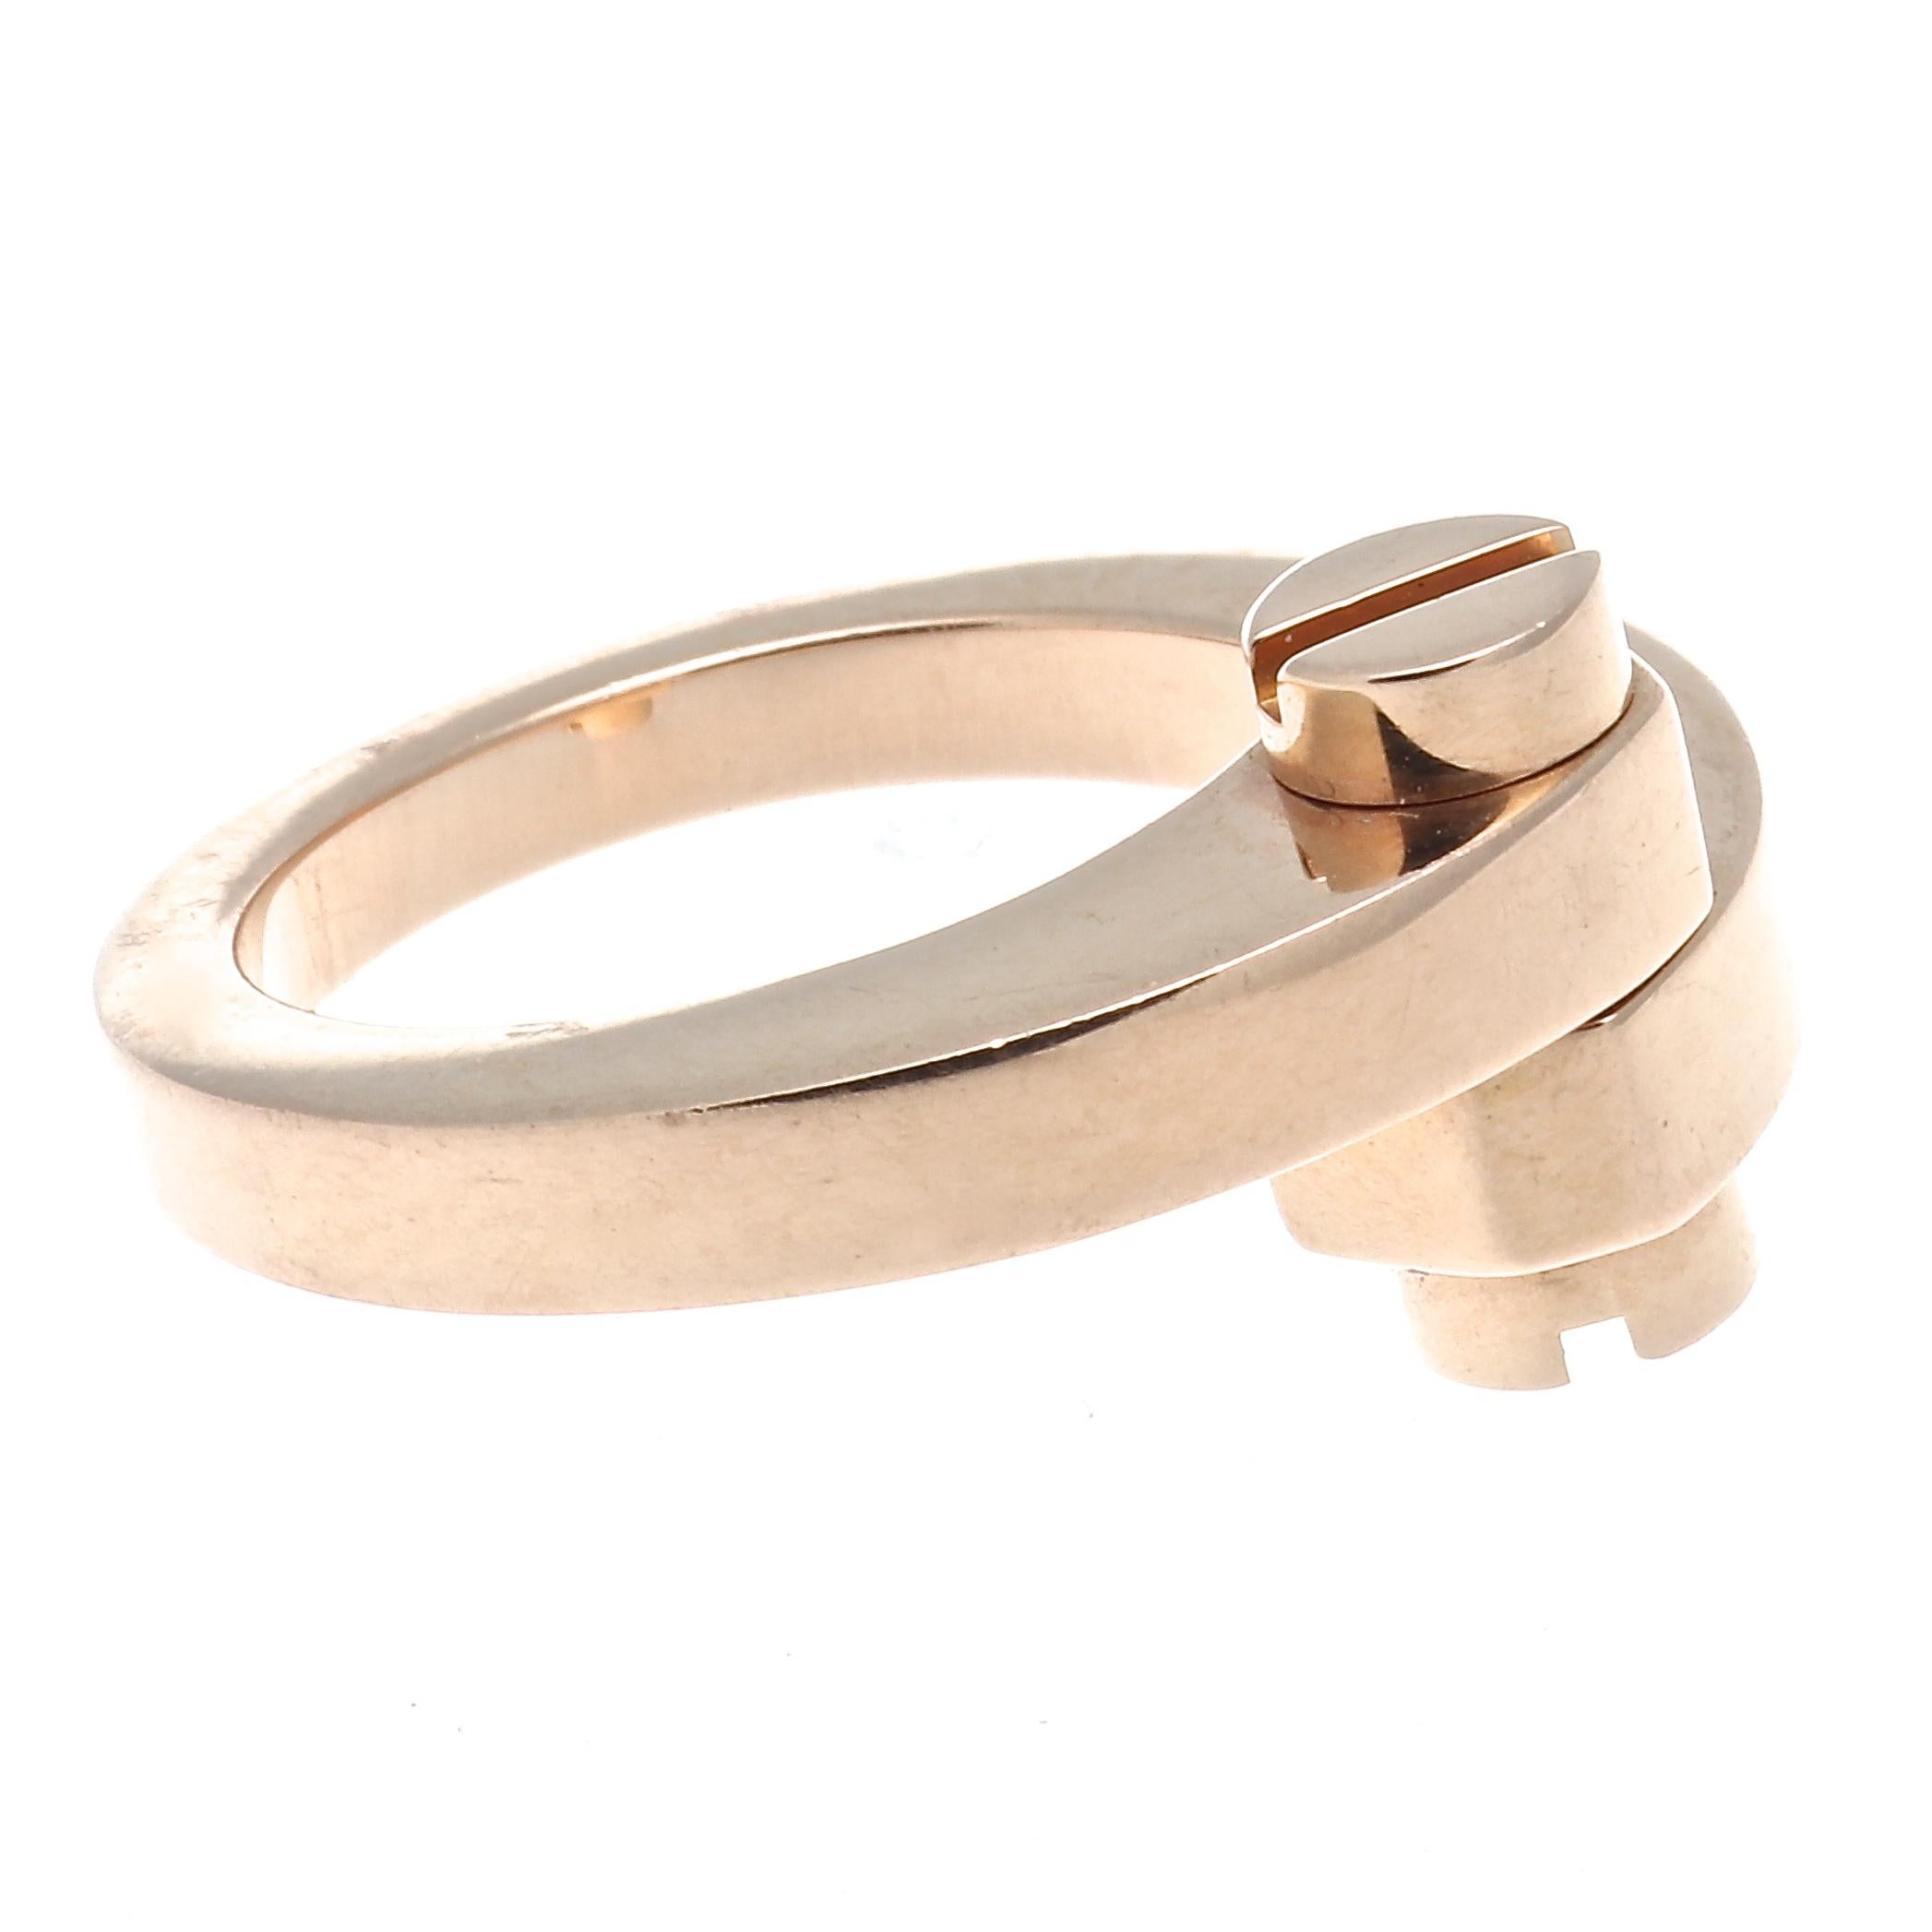 A Cartier classic, subtle details that displays their refined taste and expertise in creating styles that never are forgotten. Designed with swooping lines of 18k rose gold tightly secured by two screws. Signed Cartier and numbered.

Ring size 54 or